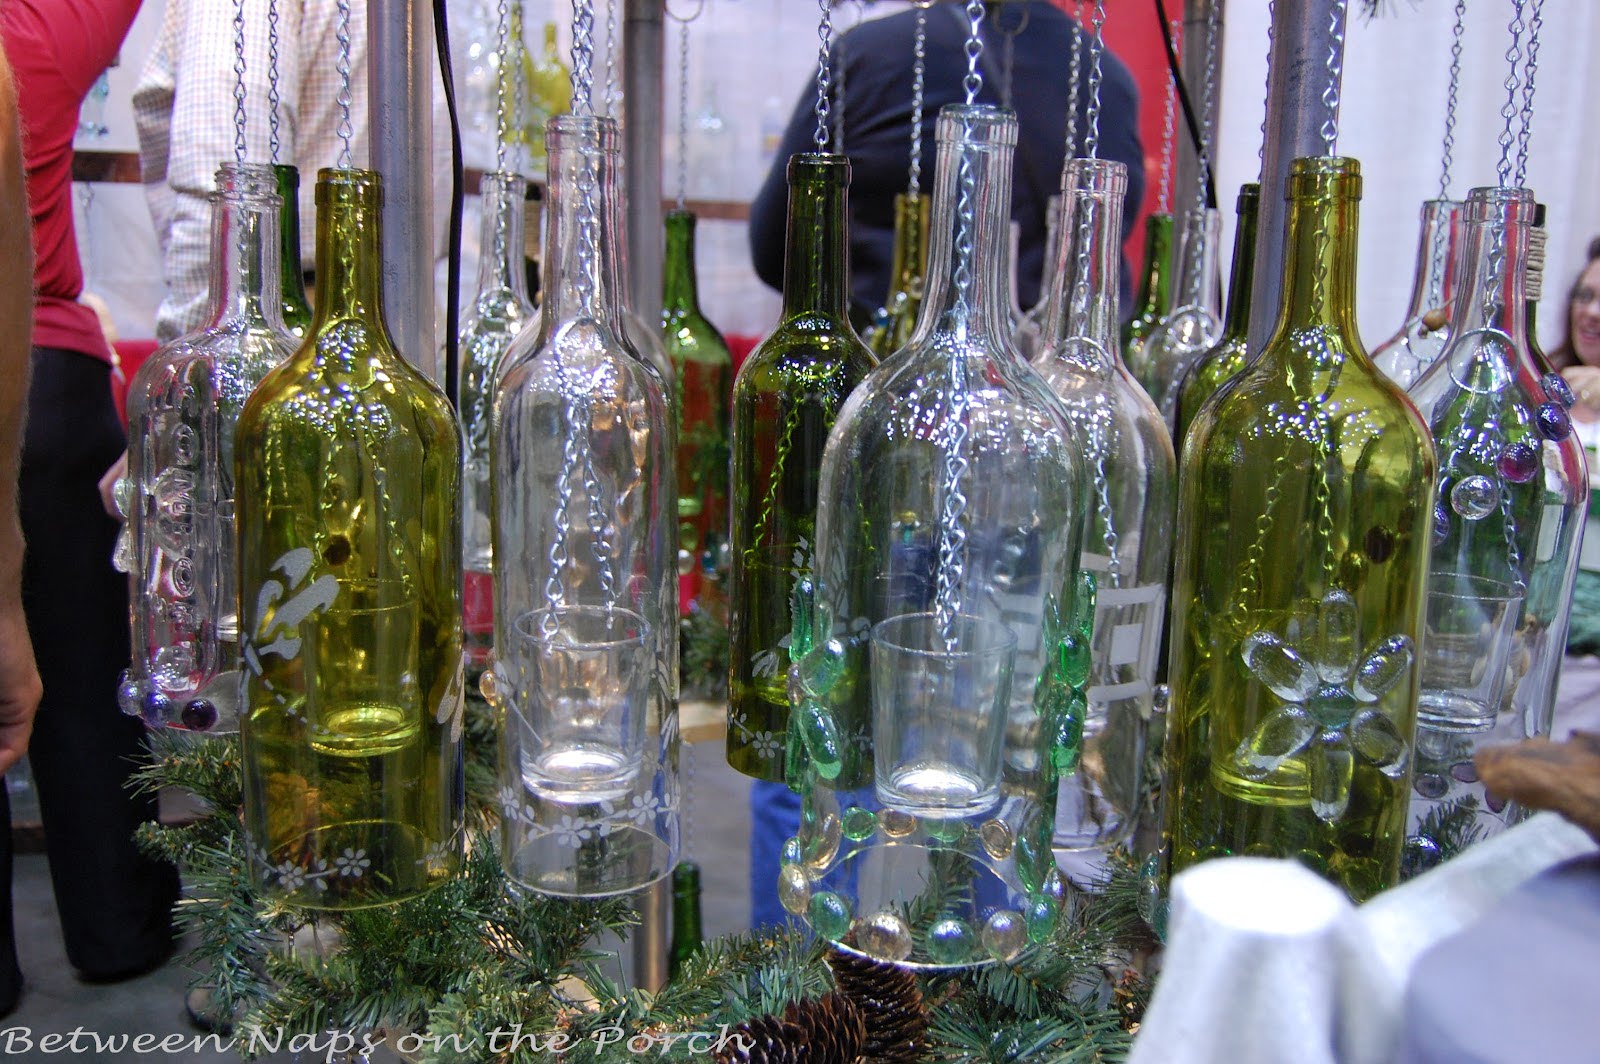 How-to-Create-Your-Own-Green-Retro-Wind-Chime-Out-of-Recycled-Wine-Bottles-wine-bottle-art-1homesthetics